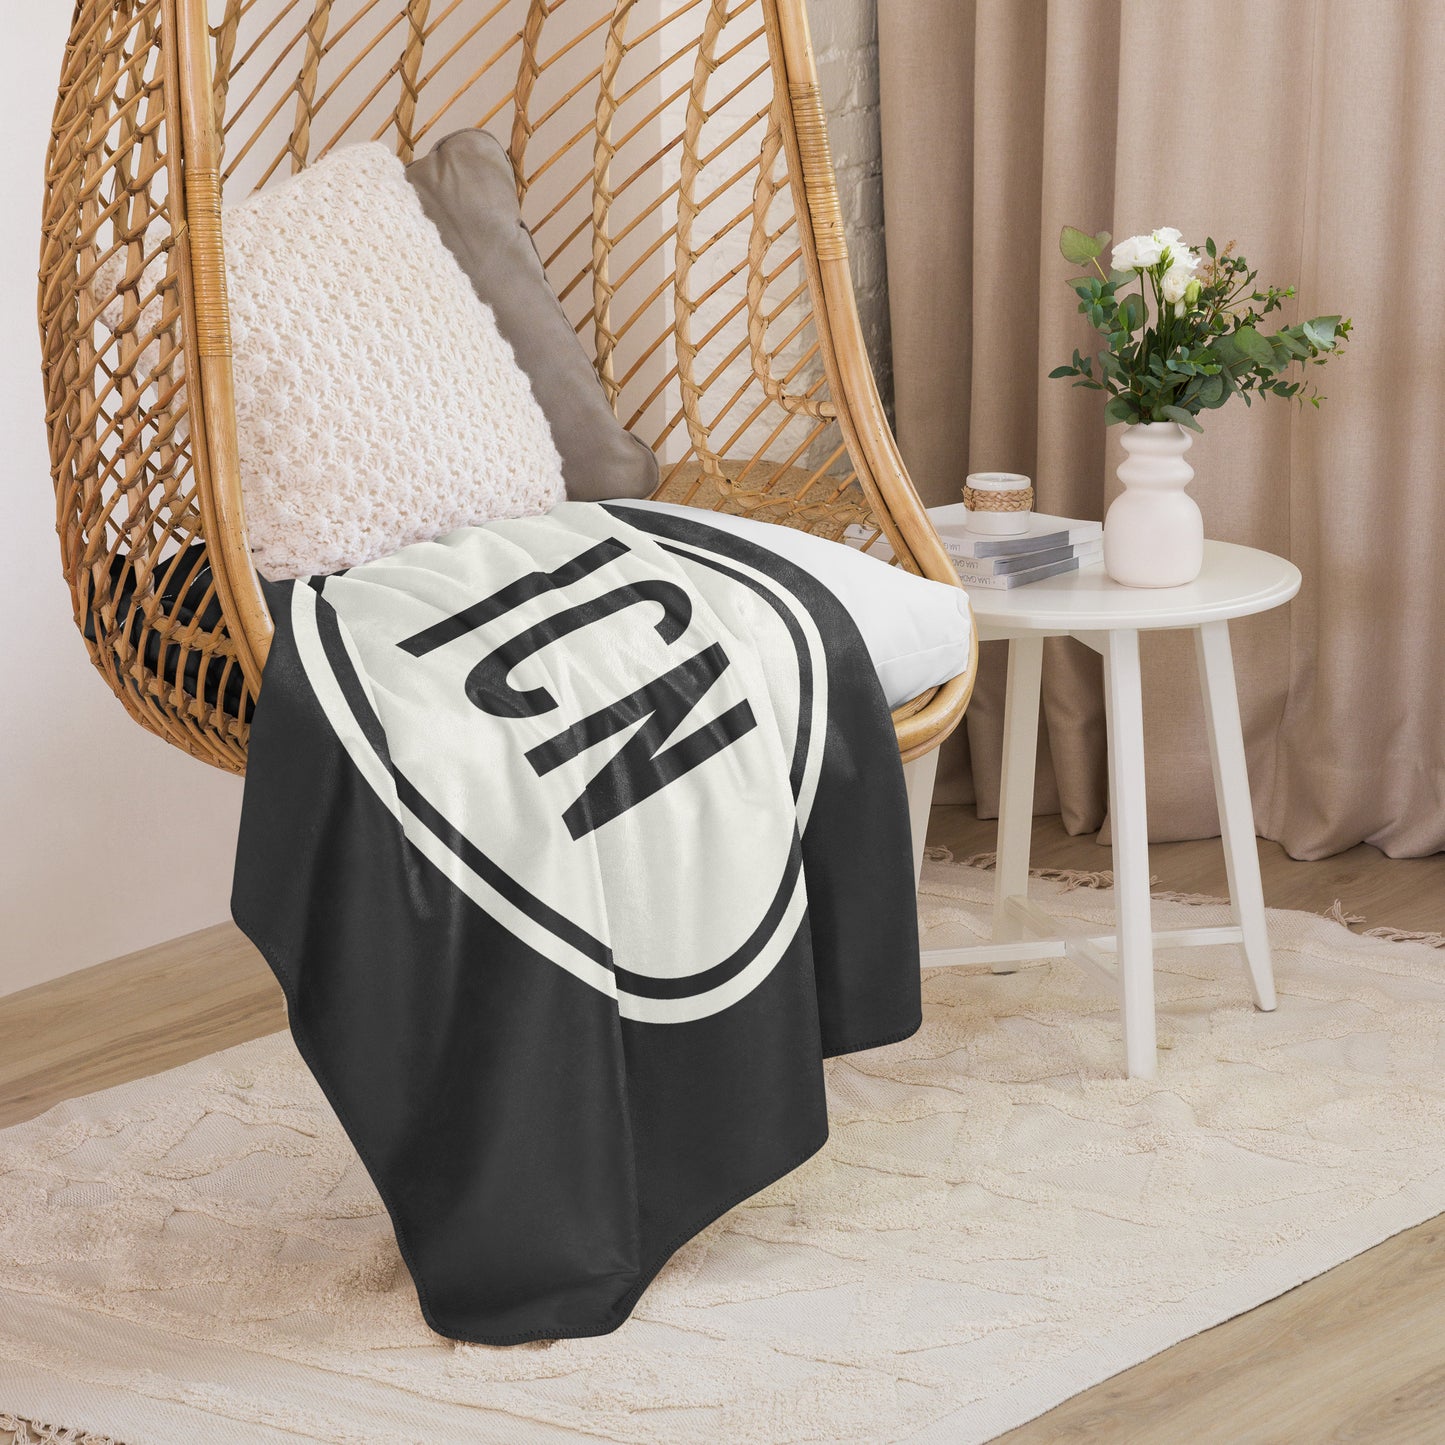 Unique Travel Gift Sherpa Blanket - White Oval • ICN Seoul • YHM Designs - Image 06